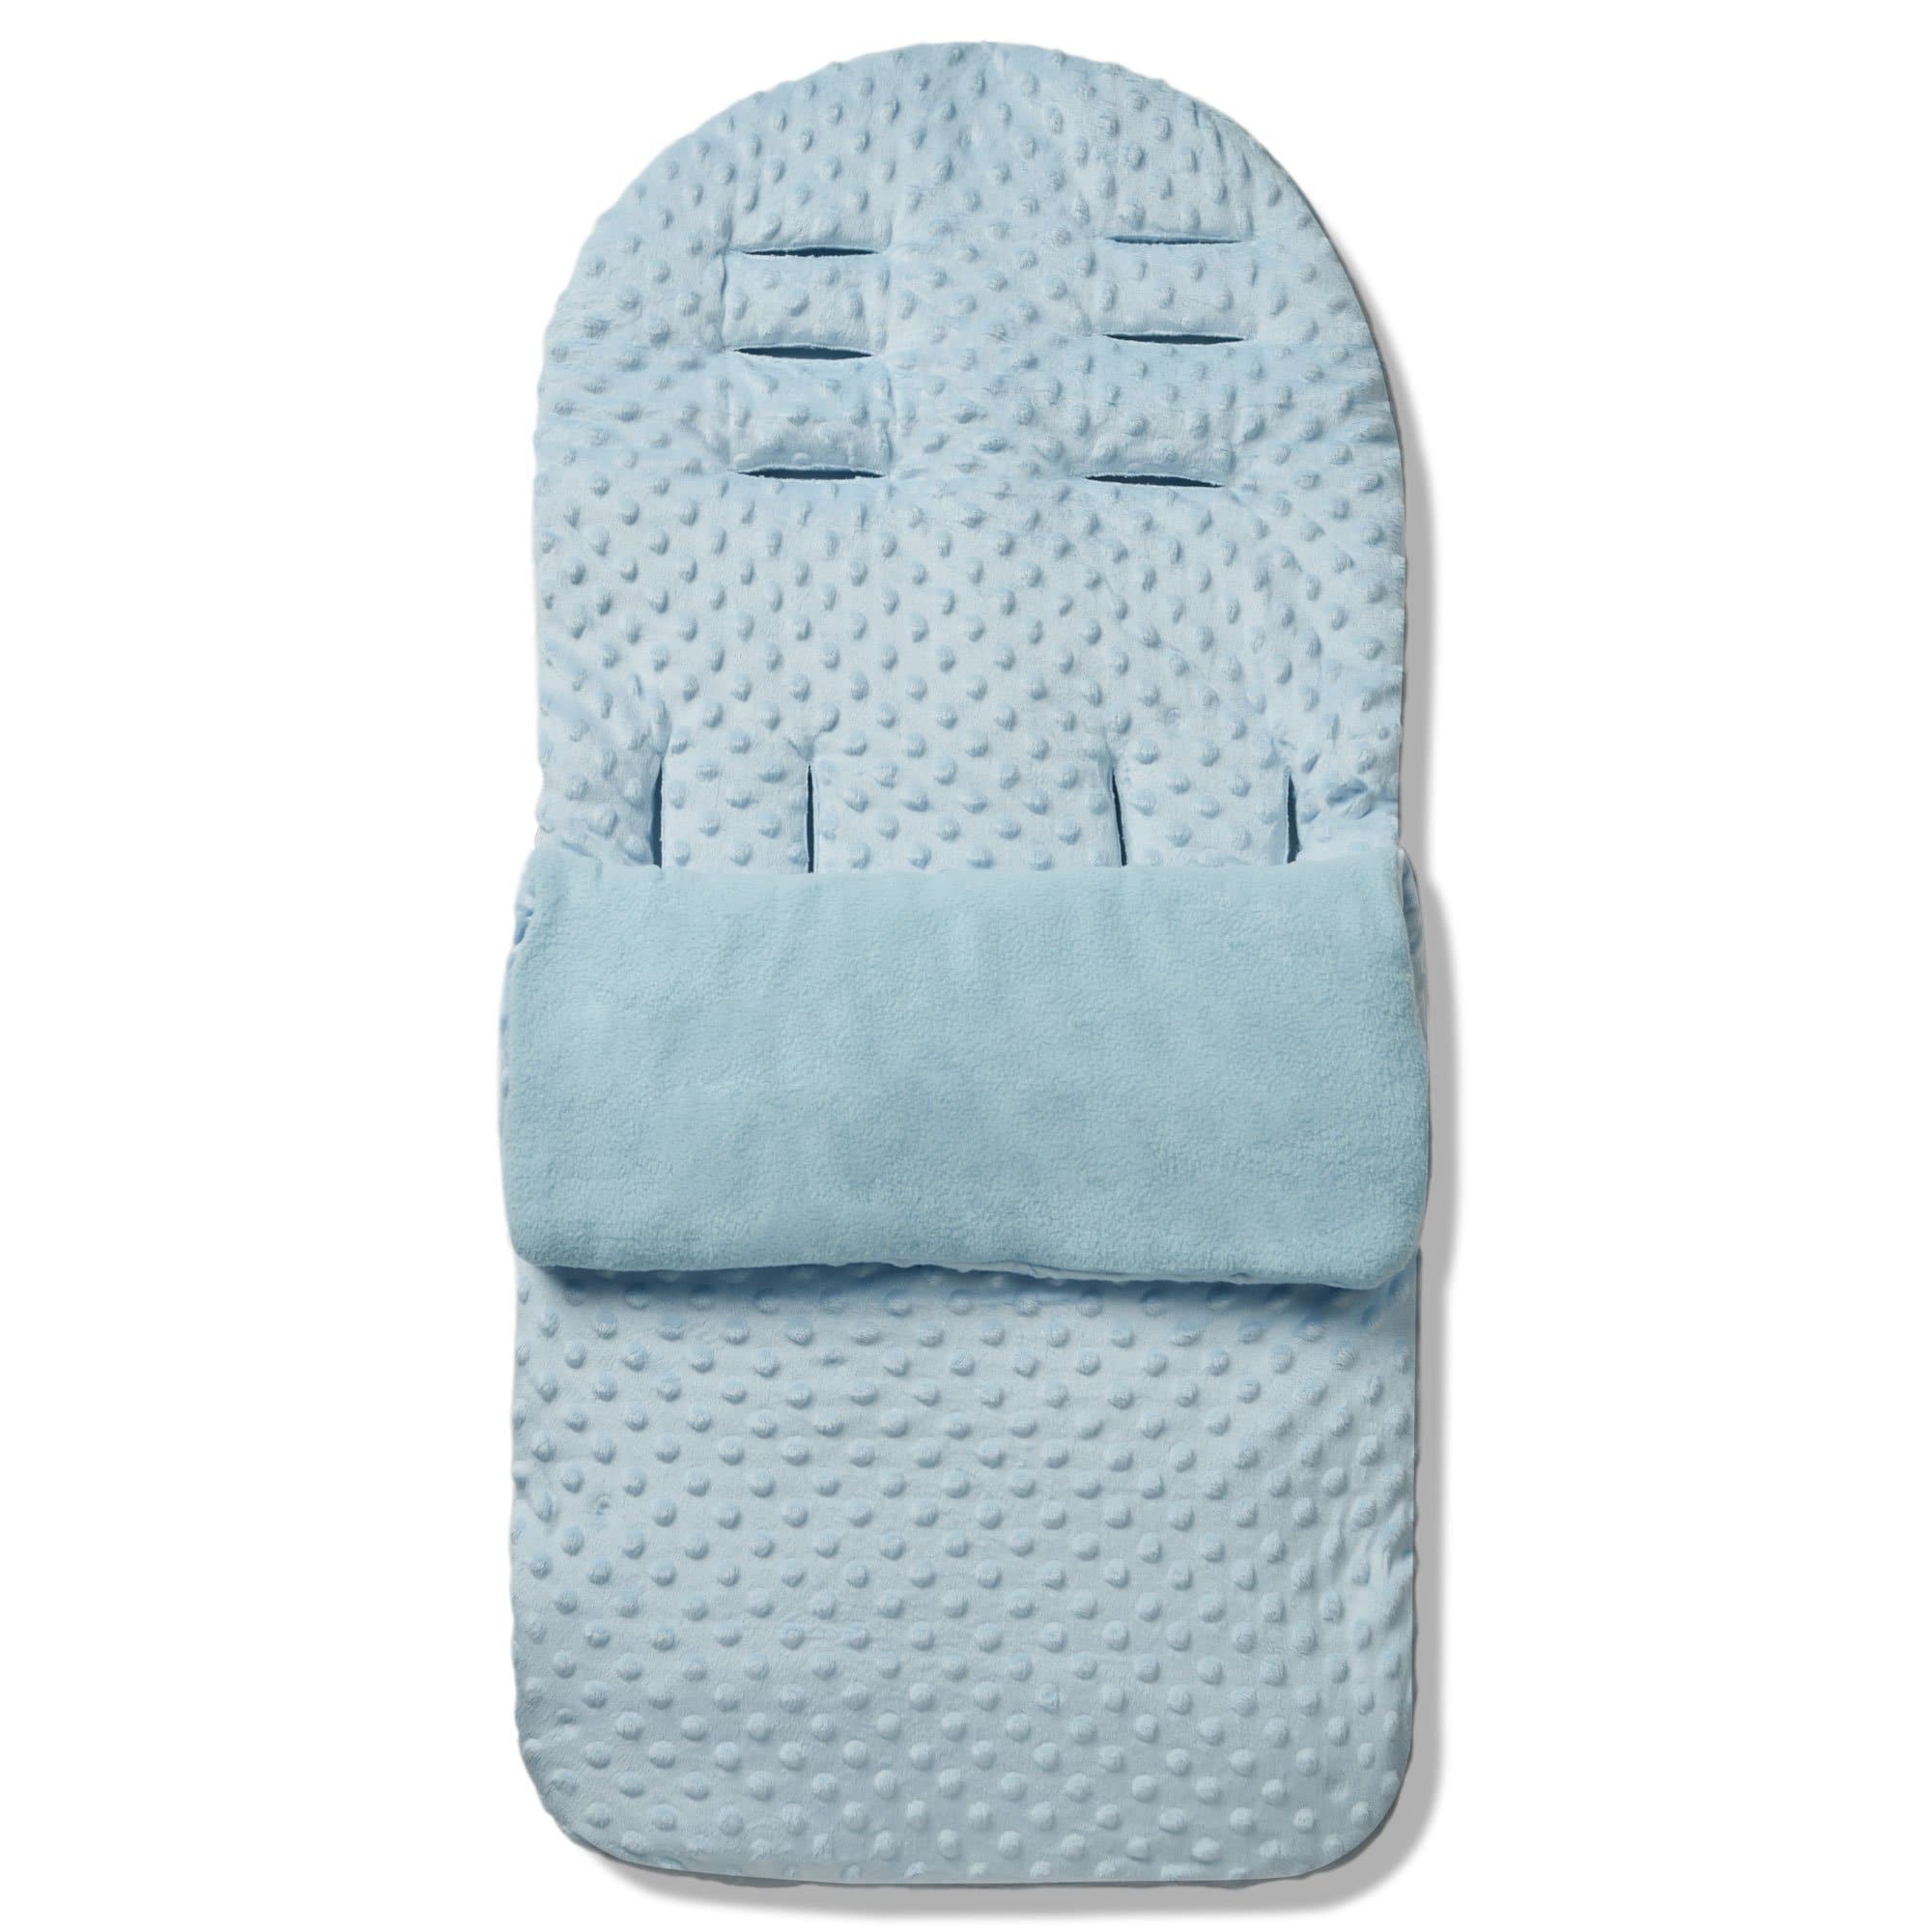 Dimple Footmuff / Cosy Toes Compatible with BabySun - Blue / Fits All Models | For Your Little One